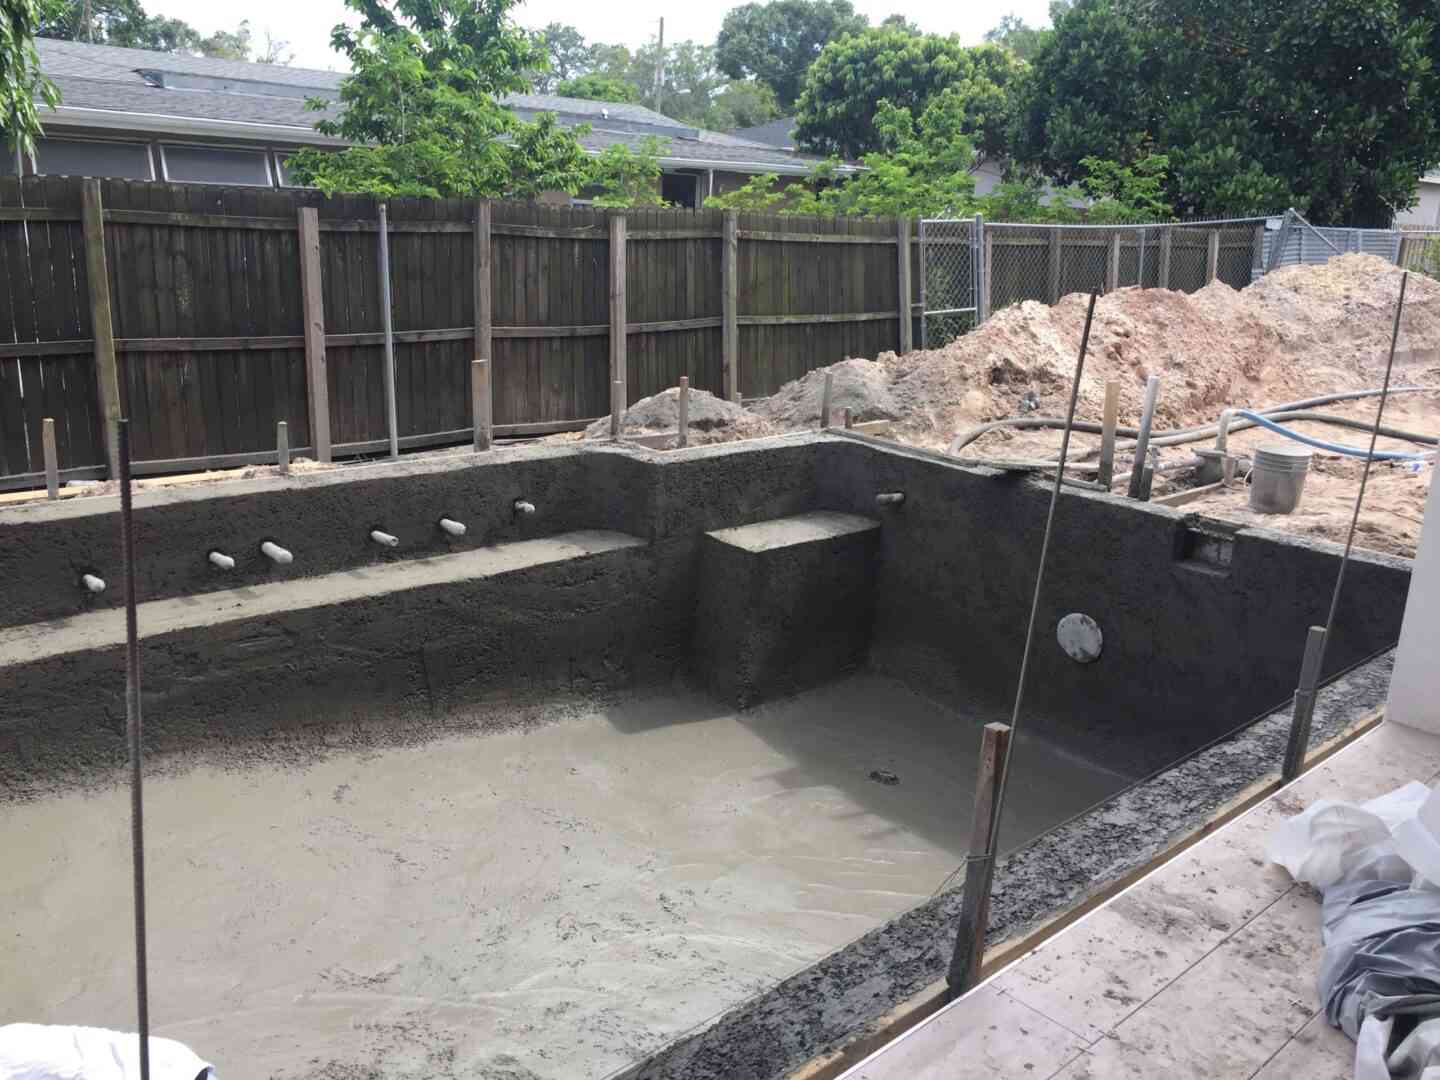 A cemented pool structure